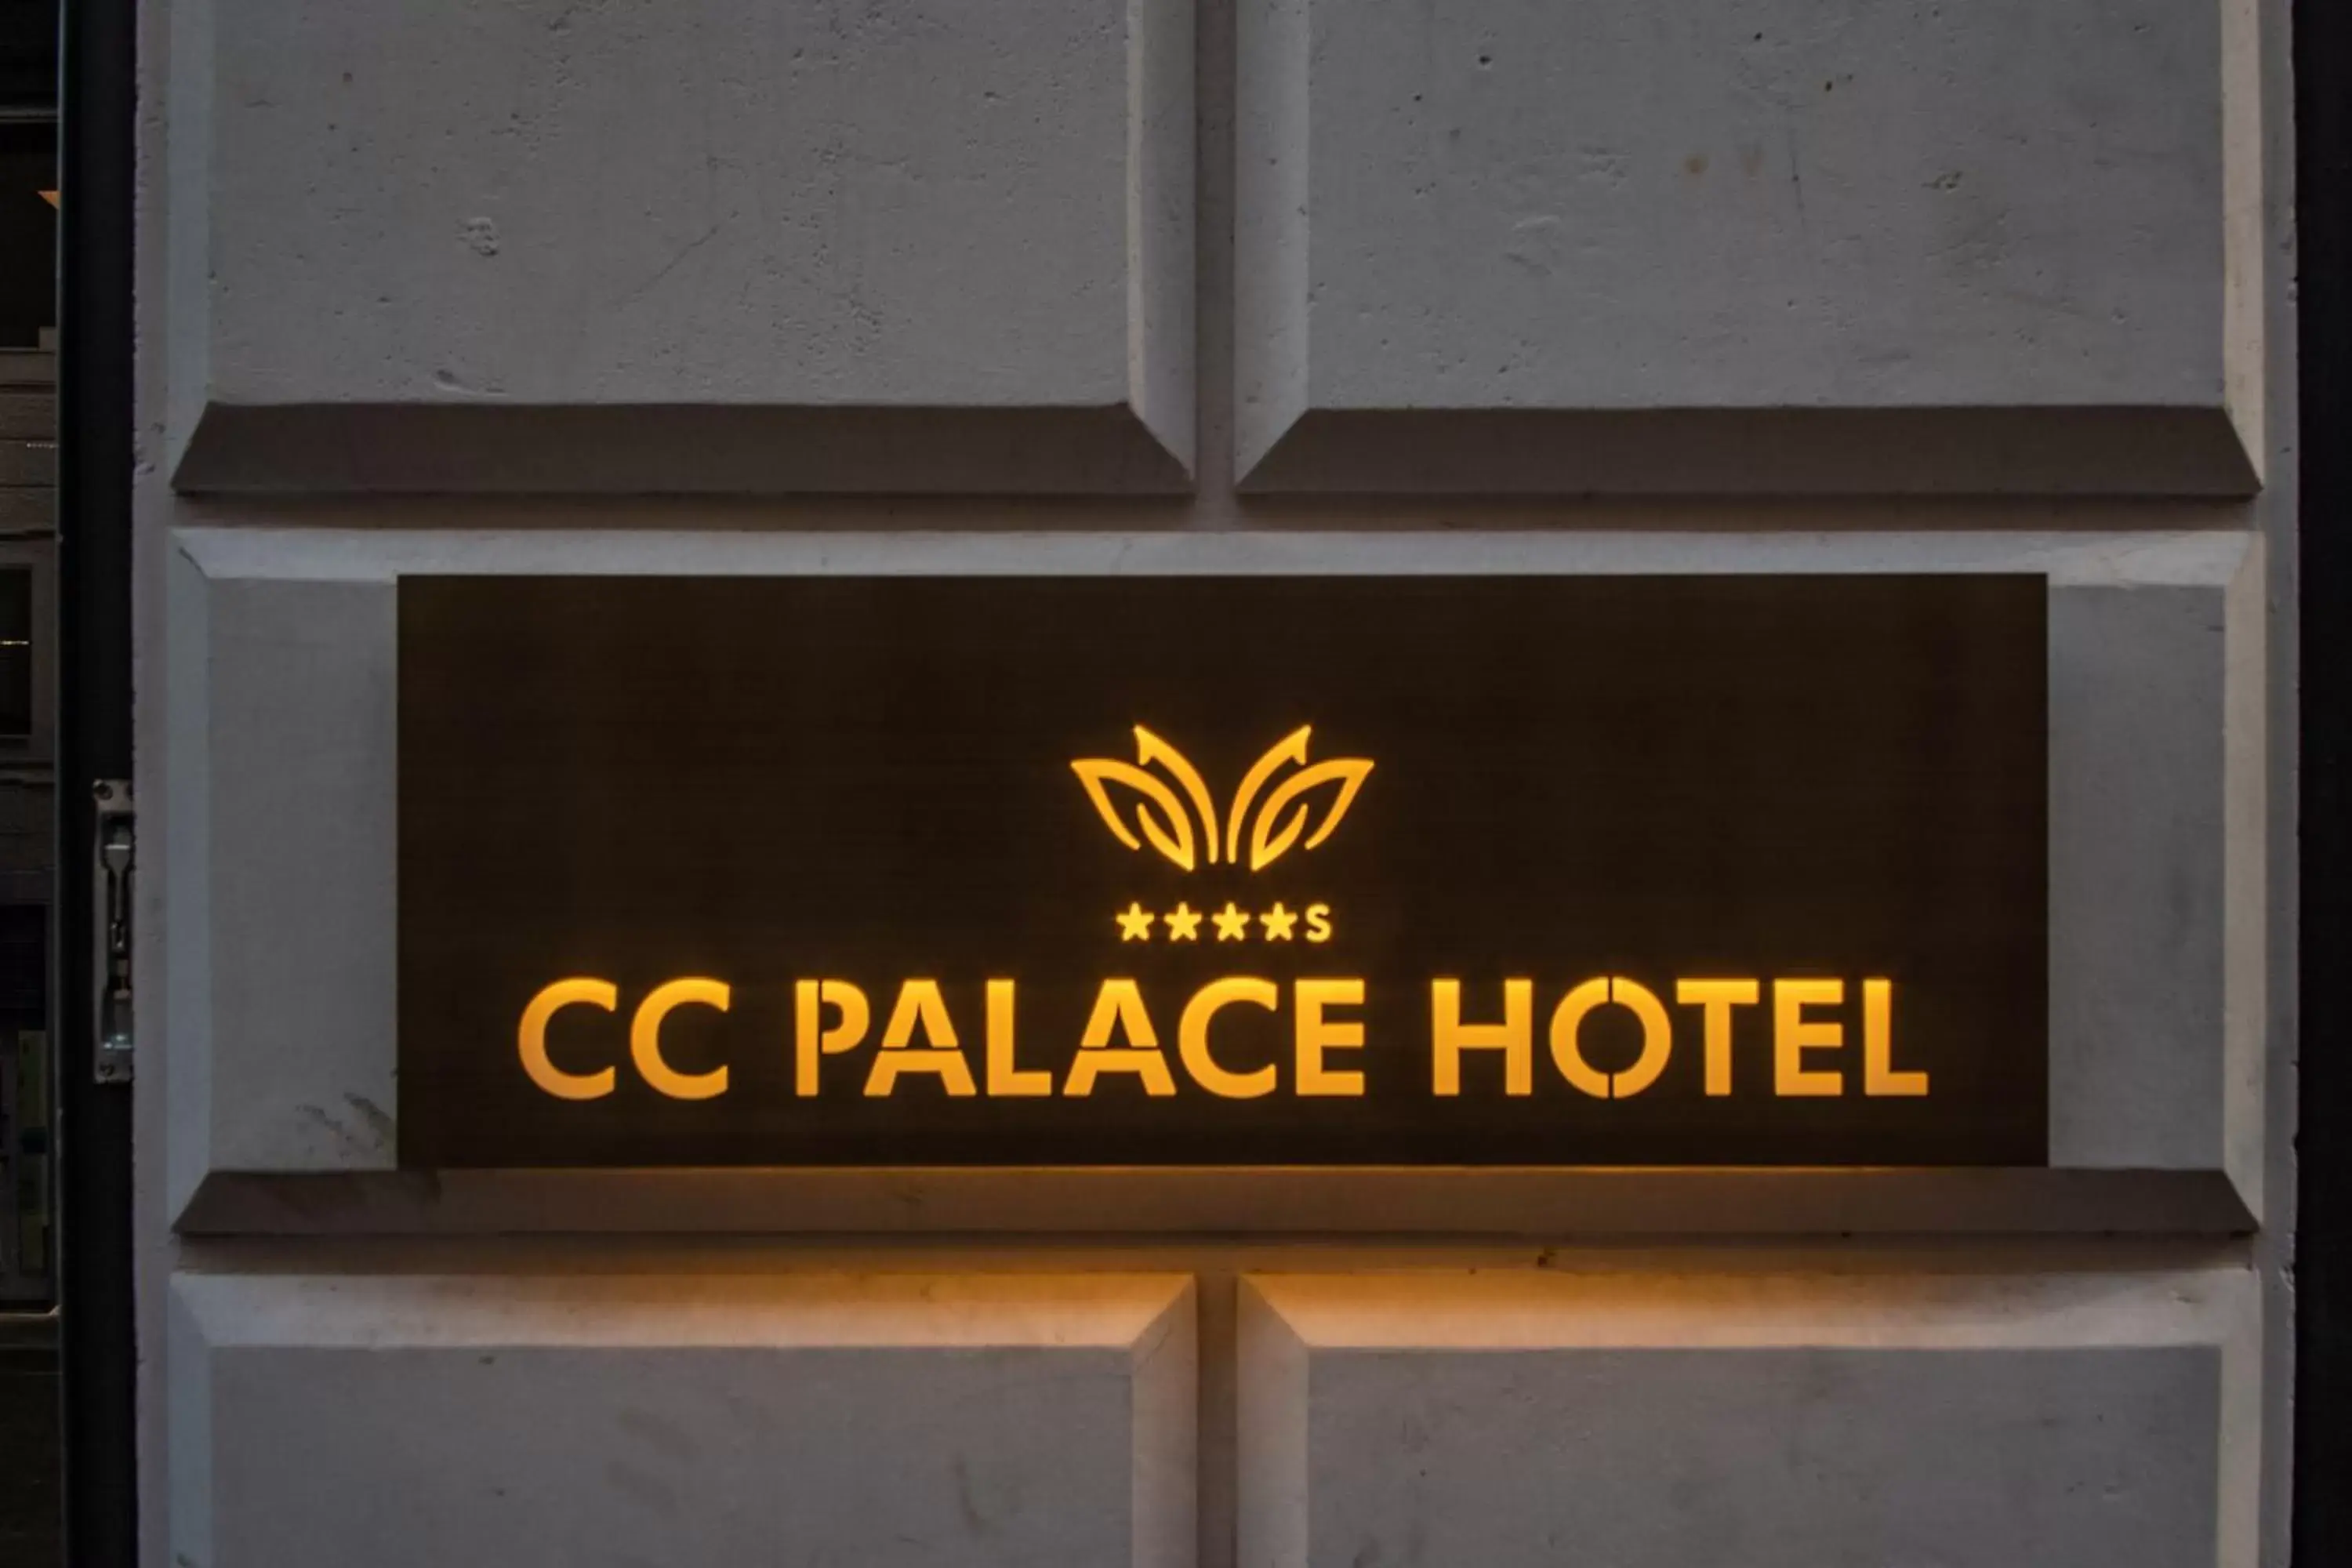 Property logo or sign in CC Palace Hotel